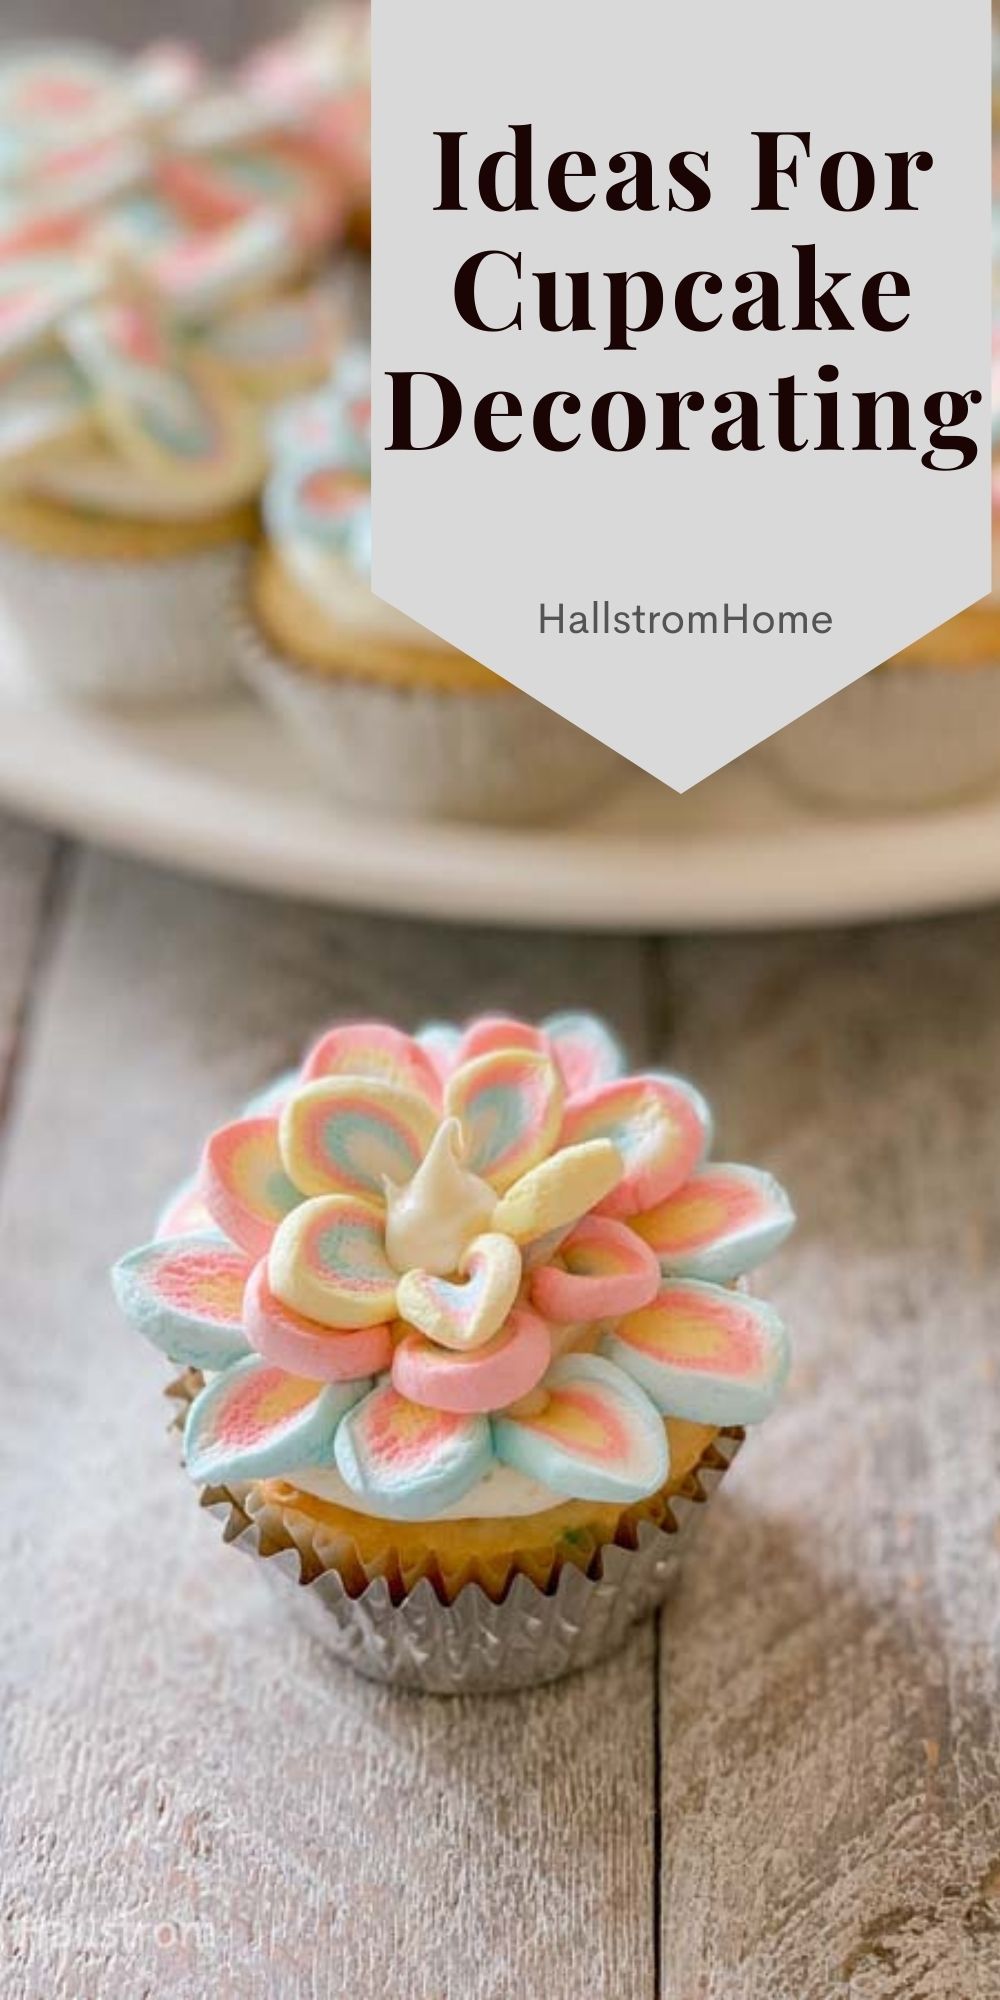 Ideas For Cupcake Decorating – Hallstrom Home